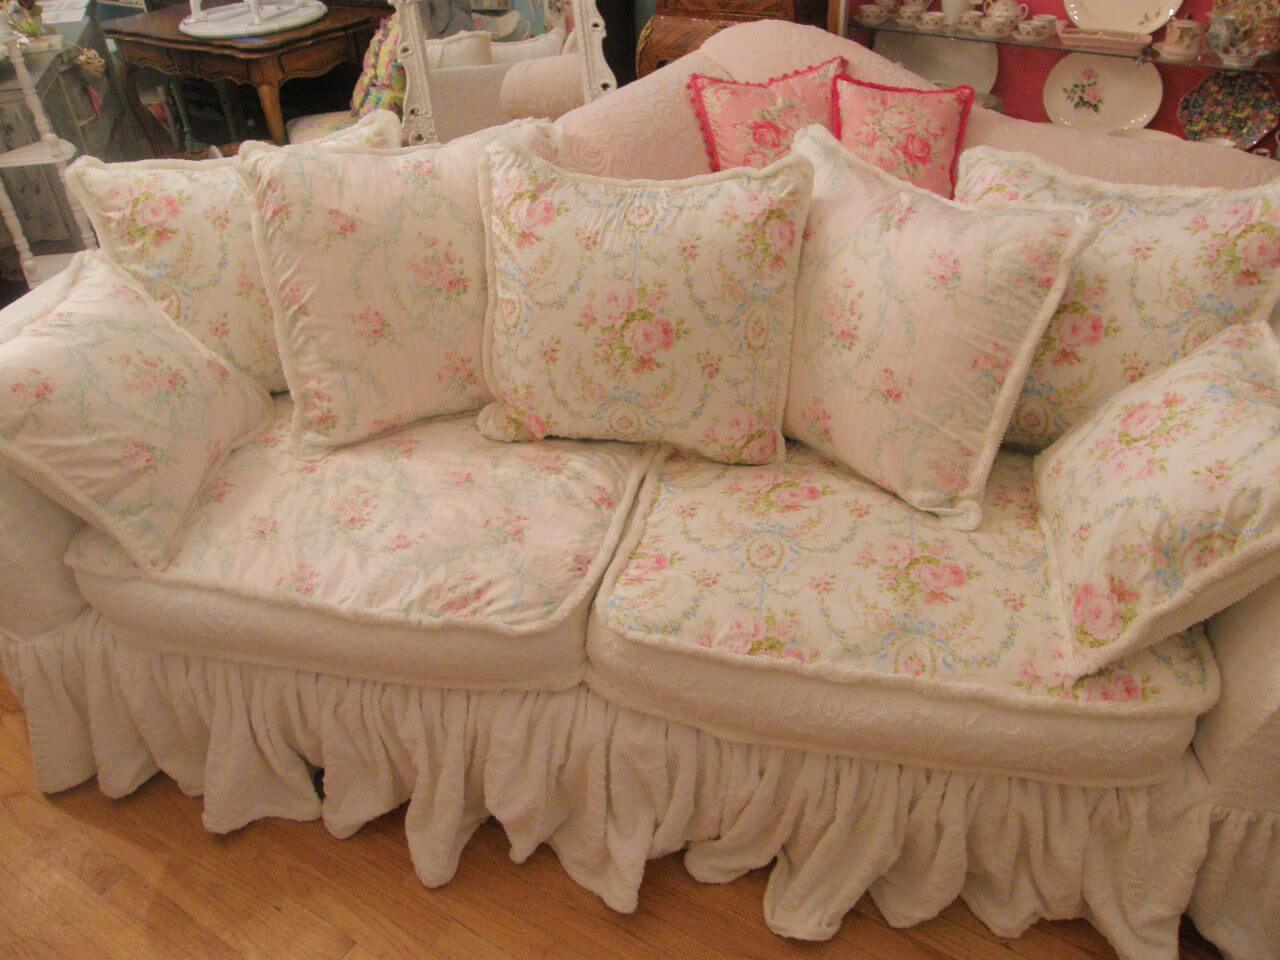 Gorgeous Flowered Sofa with Many Cushions